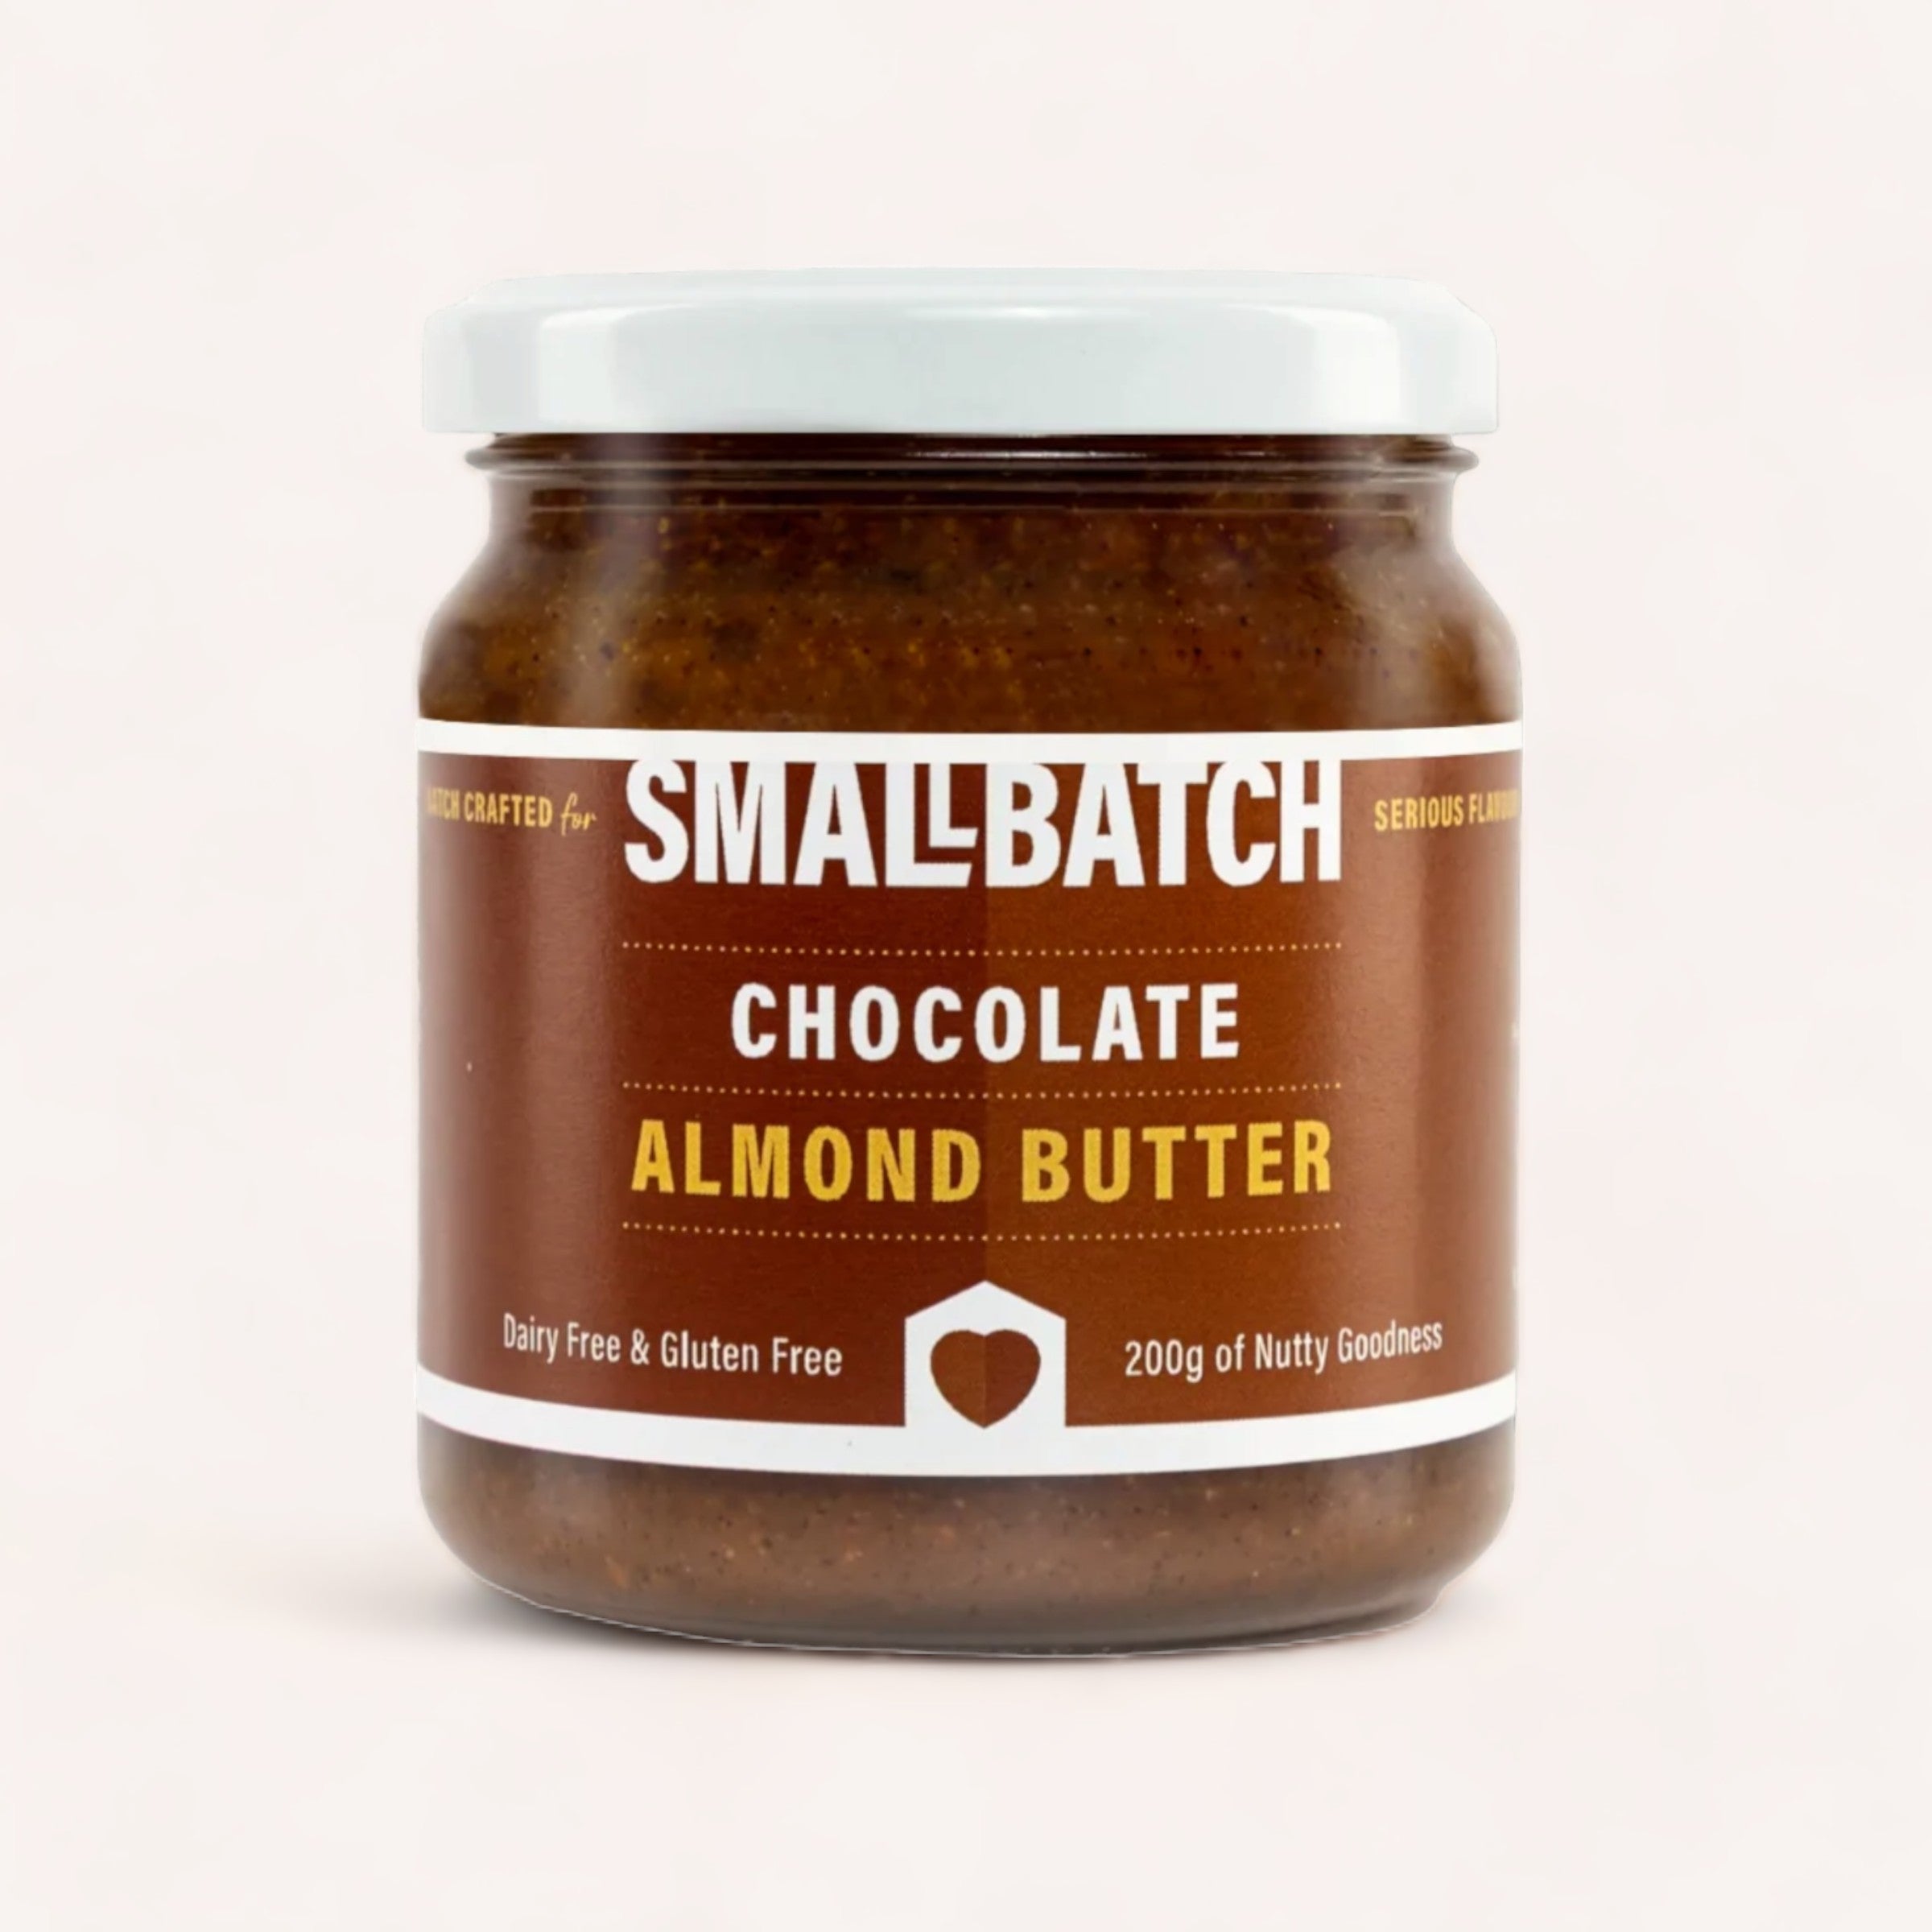 A jar of Smallbatch Chocolate Almond Butter, featuring the label "dairy free & gluten free" and "200g of nutty goodness.